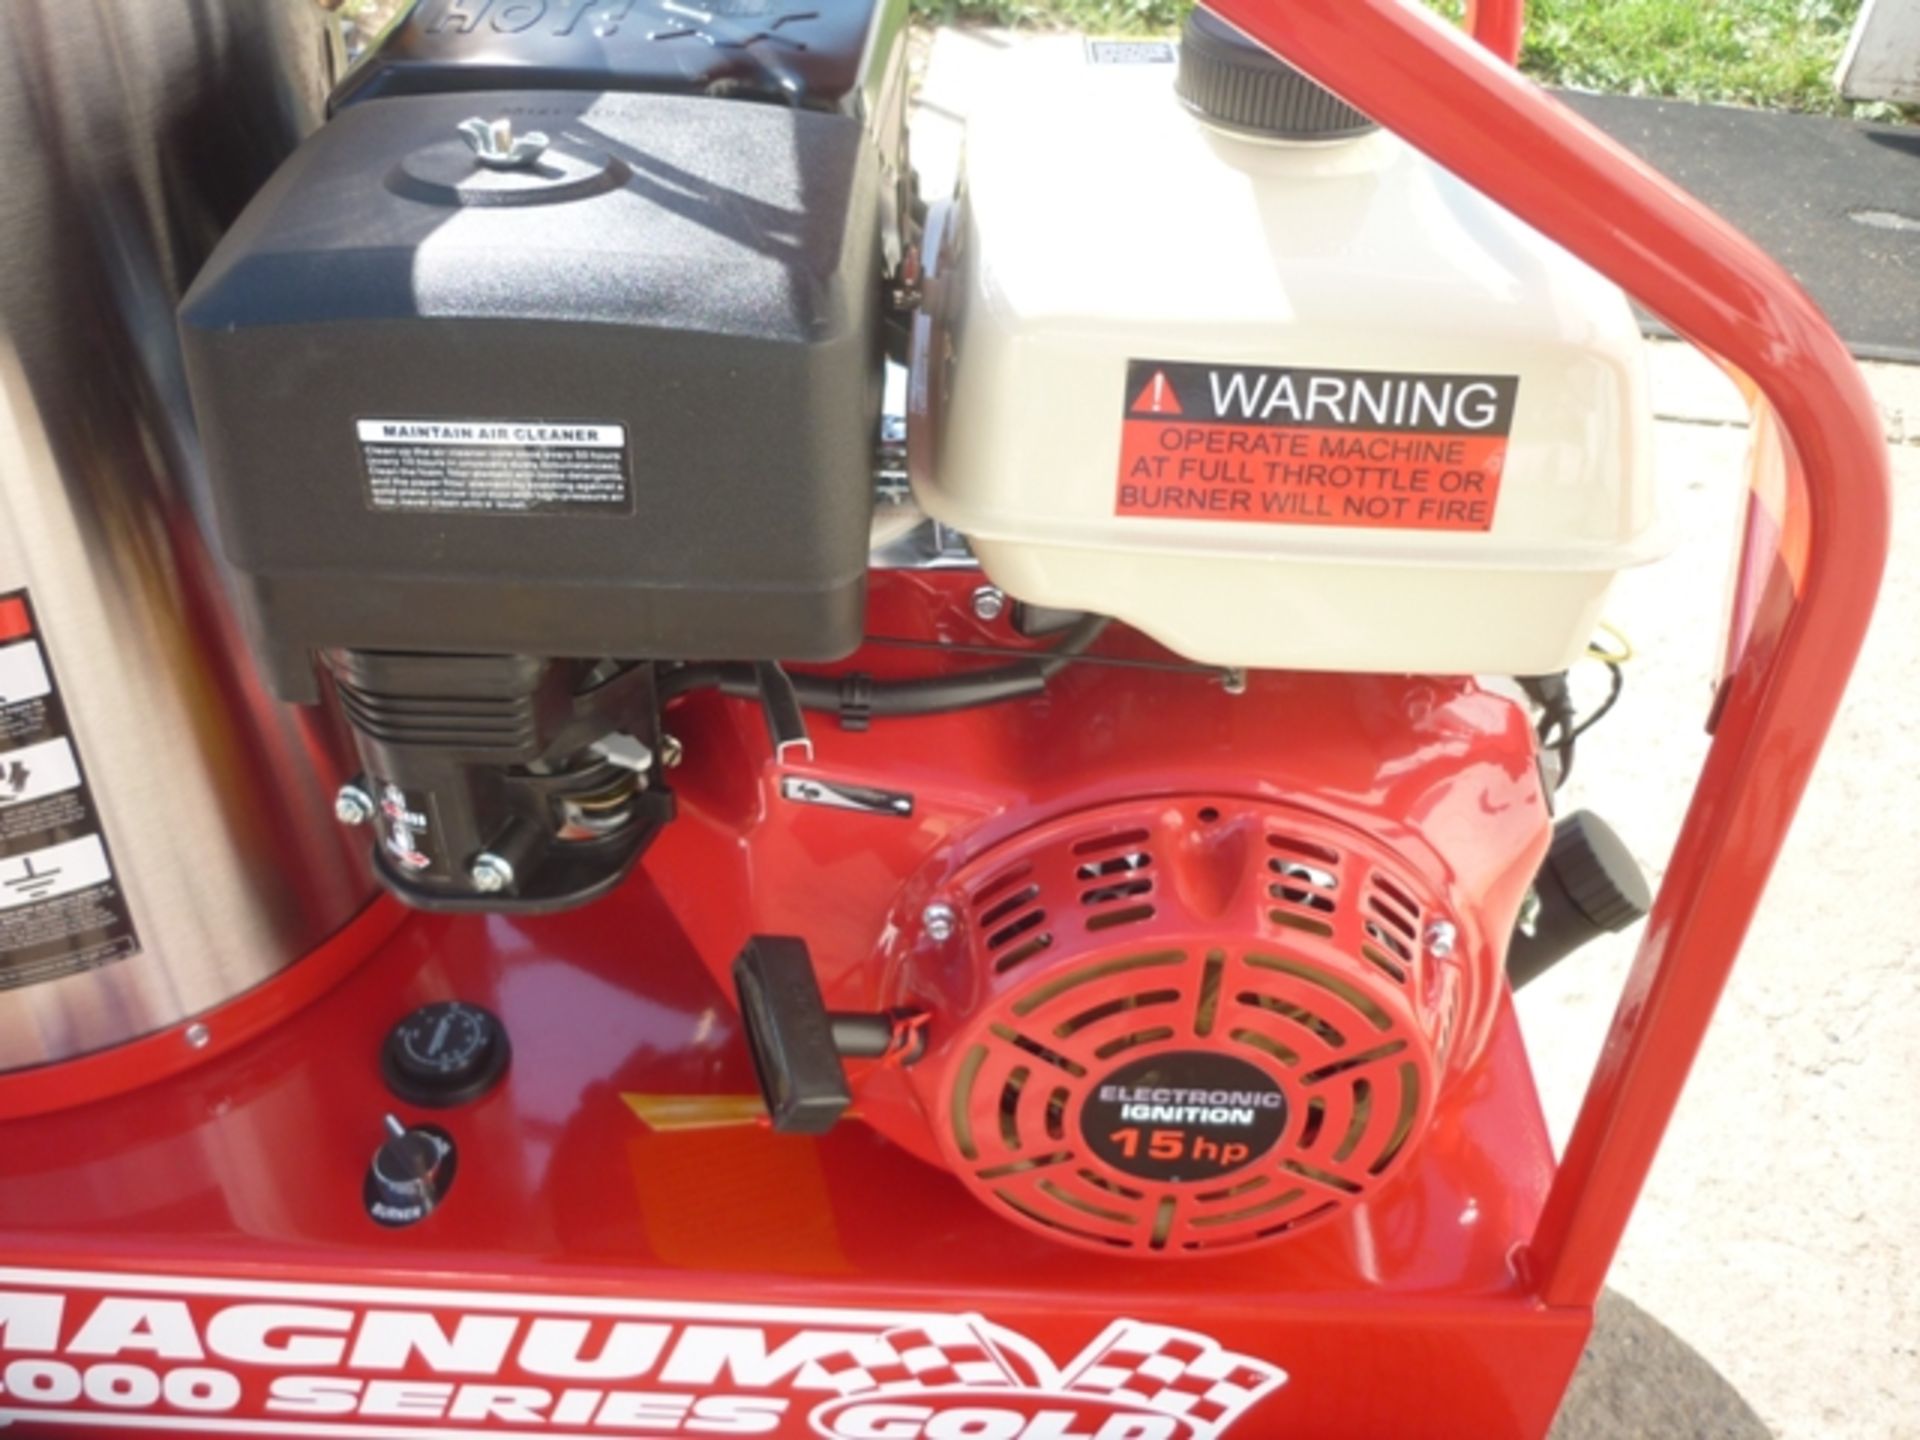 EASY KLEEN MAGNUM 4000 HOT WATER PRESURE WASHER S/N 215110 - NOTE "NO OIL IN ENGINE OR PUMP" - Image 4 of 4